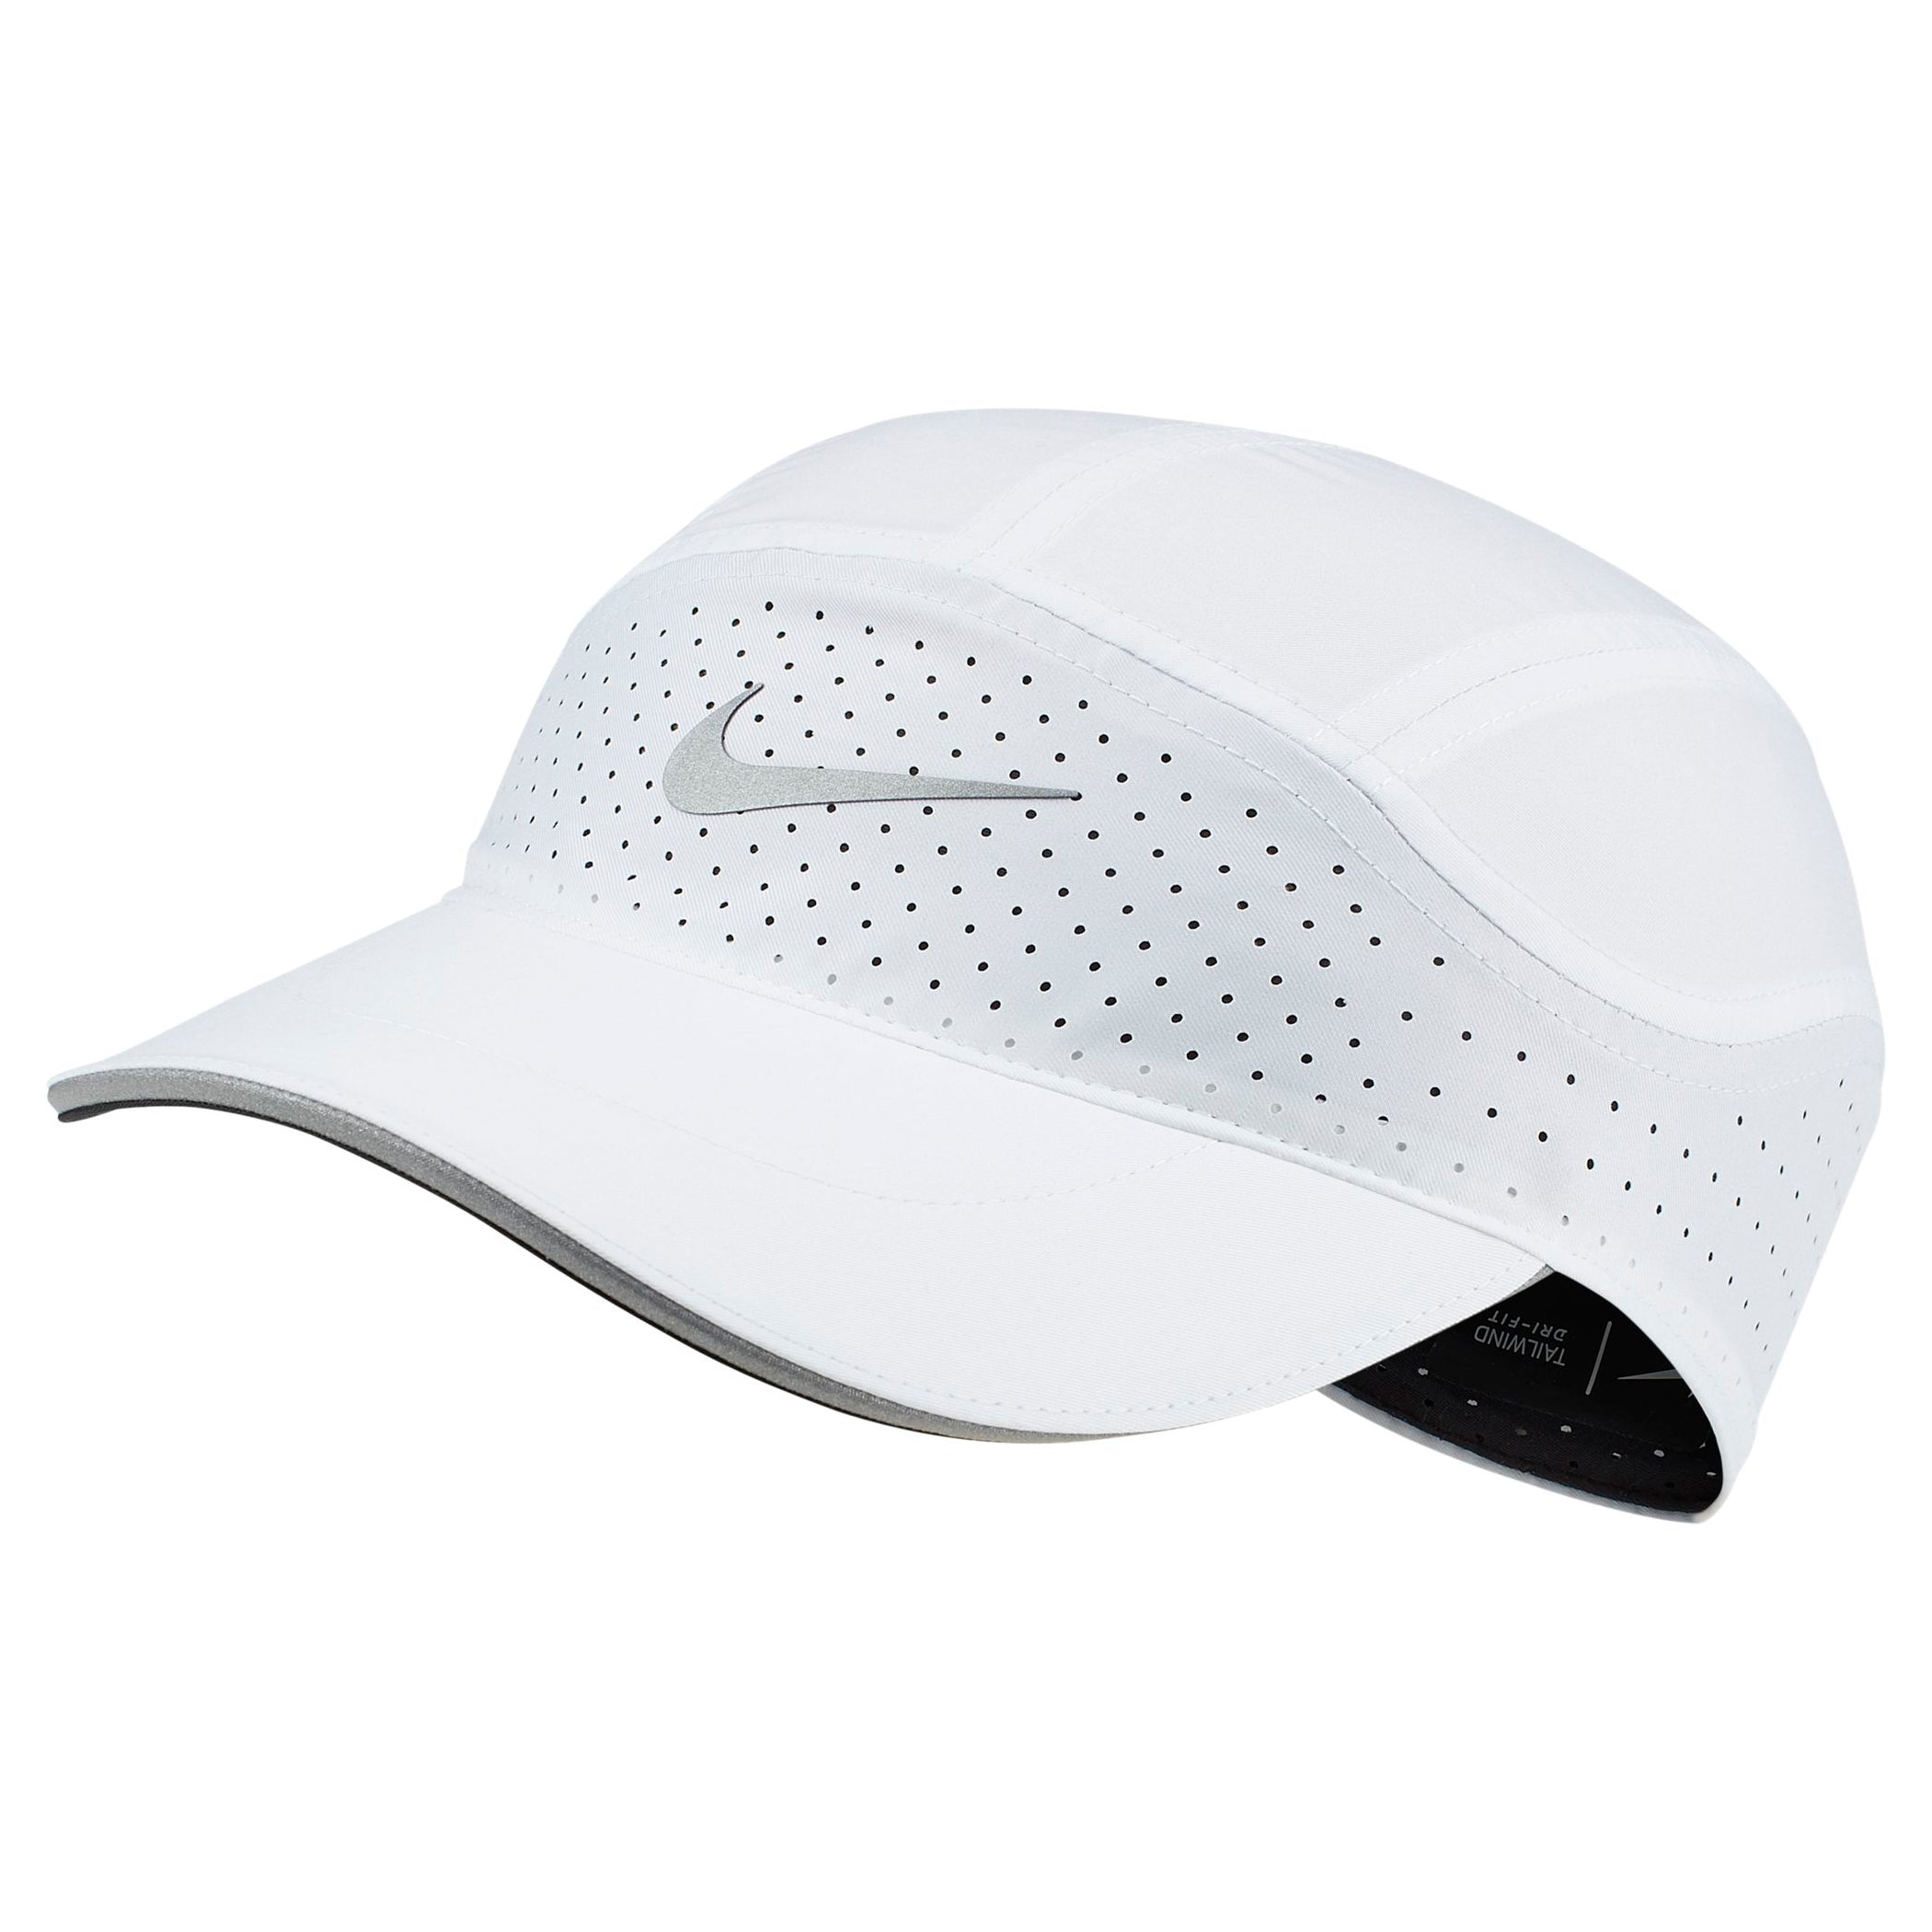 Nike Unisex Aerobill Tailwind Running Cap in White, Size: One Size | BV2204-100